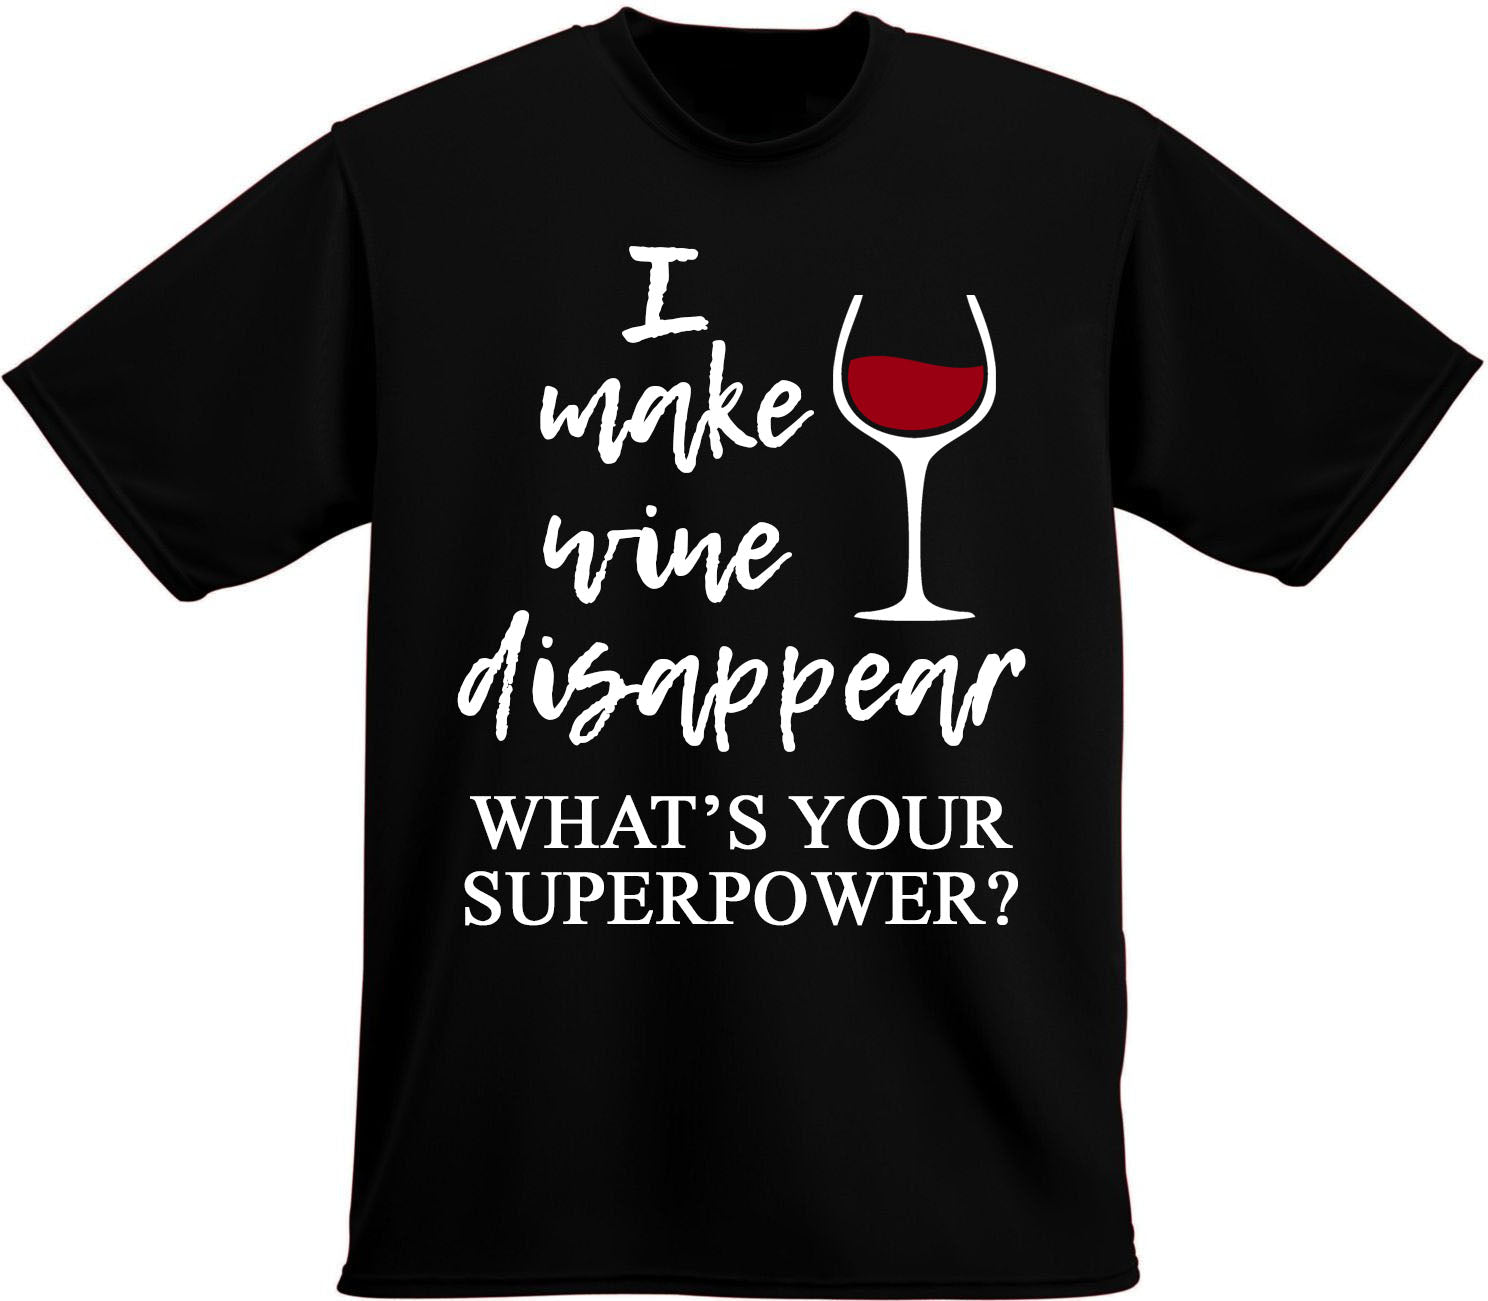 What is your superpower t-shirt